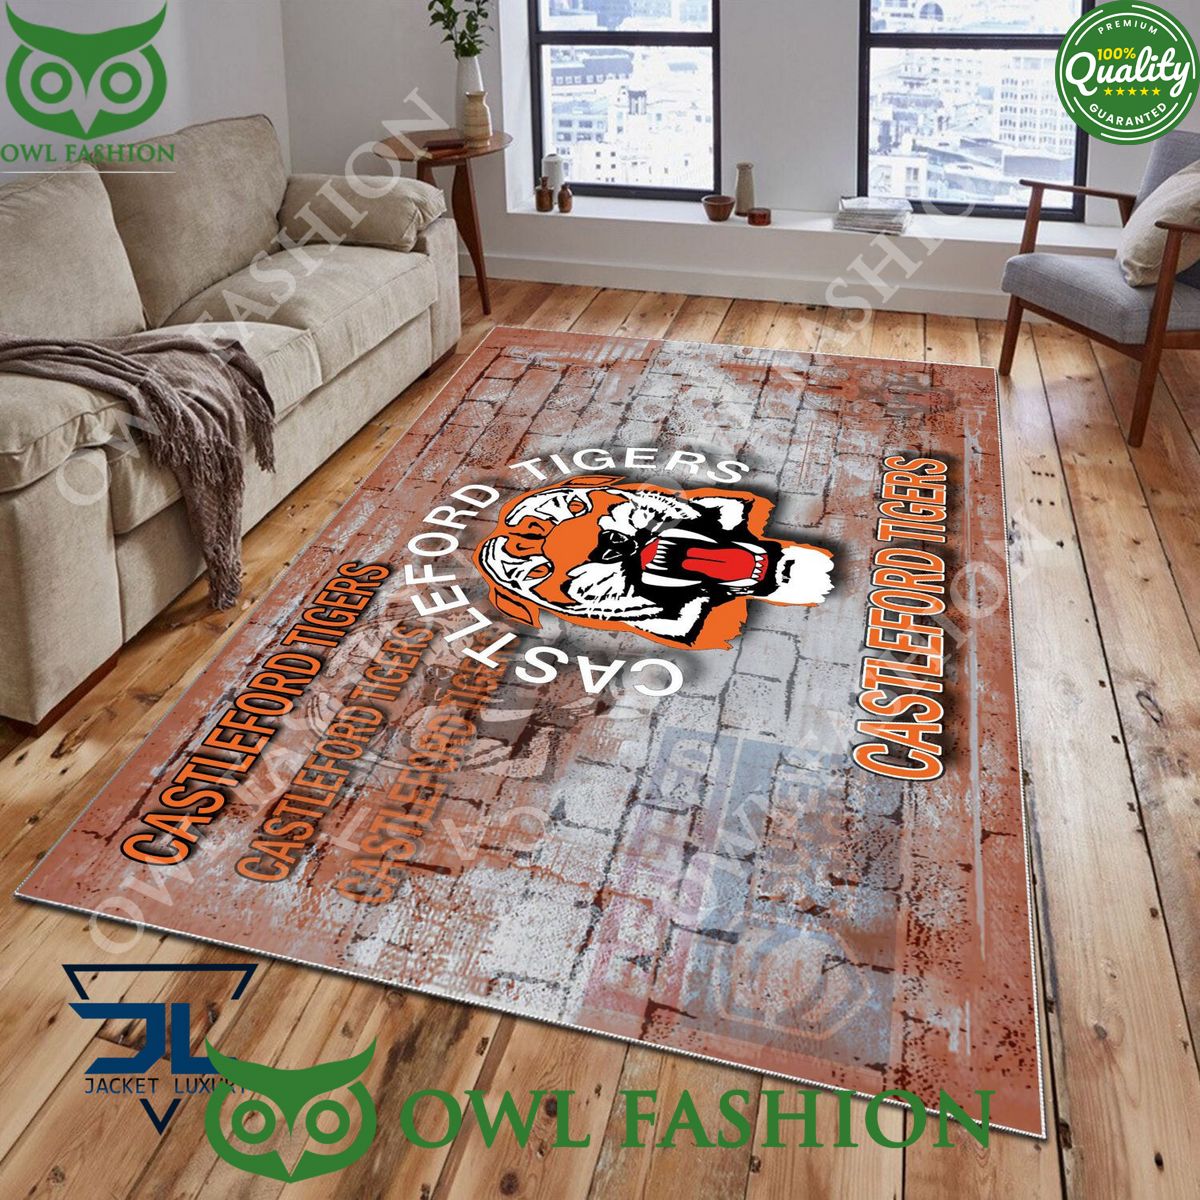 Castleford Tigers Super League Rugby Carpet Rug You are always best dear